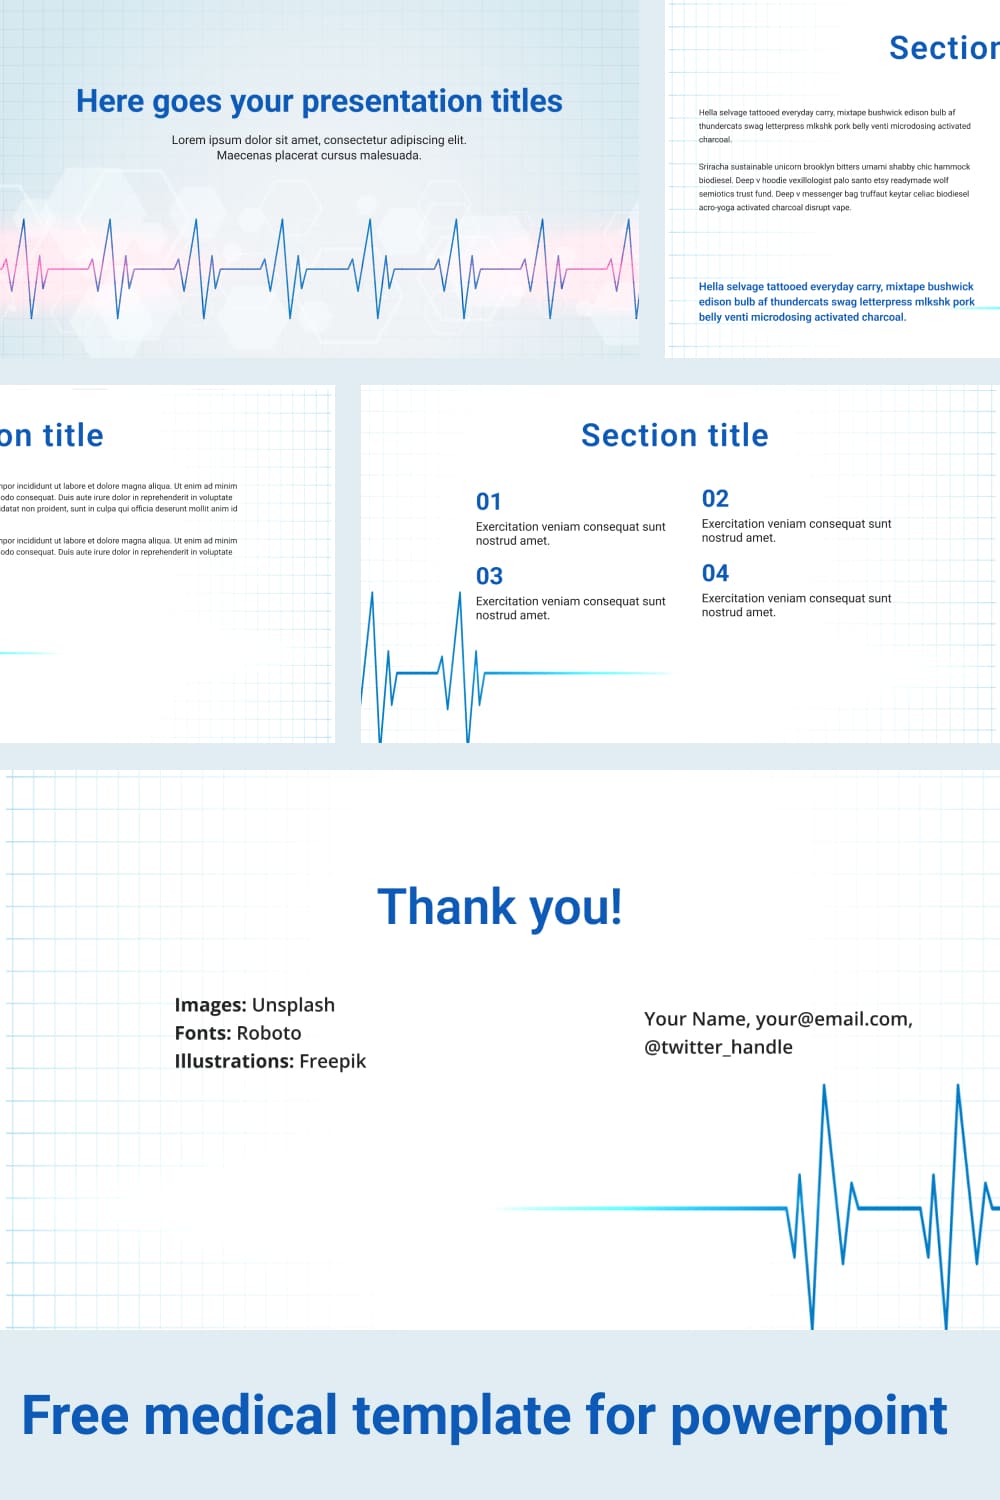 Pint Free Medical Template For Powerpoint.